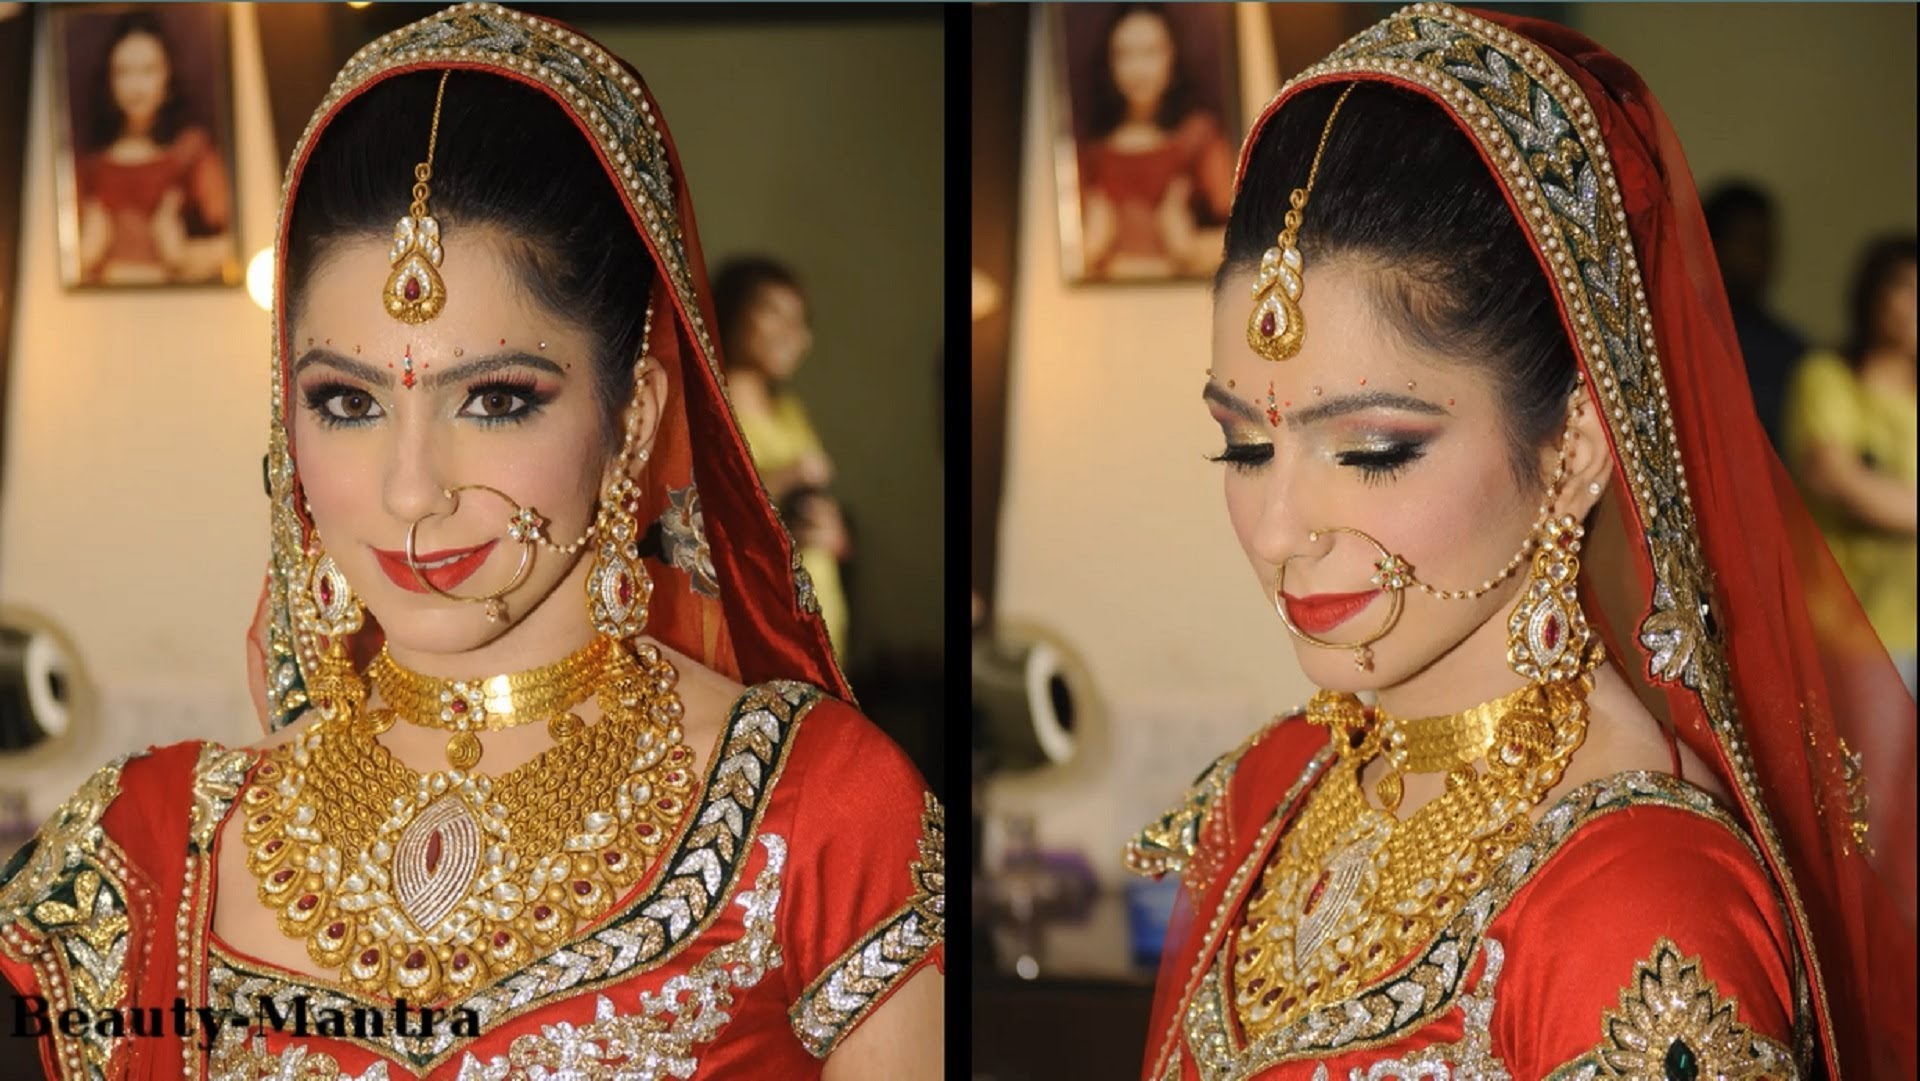 Bridal Makeup Ideas - Traditional Indian Bride - YouTube